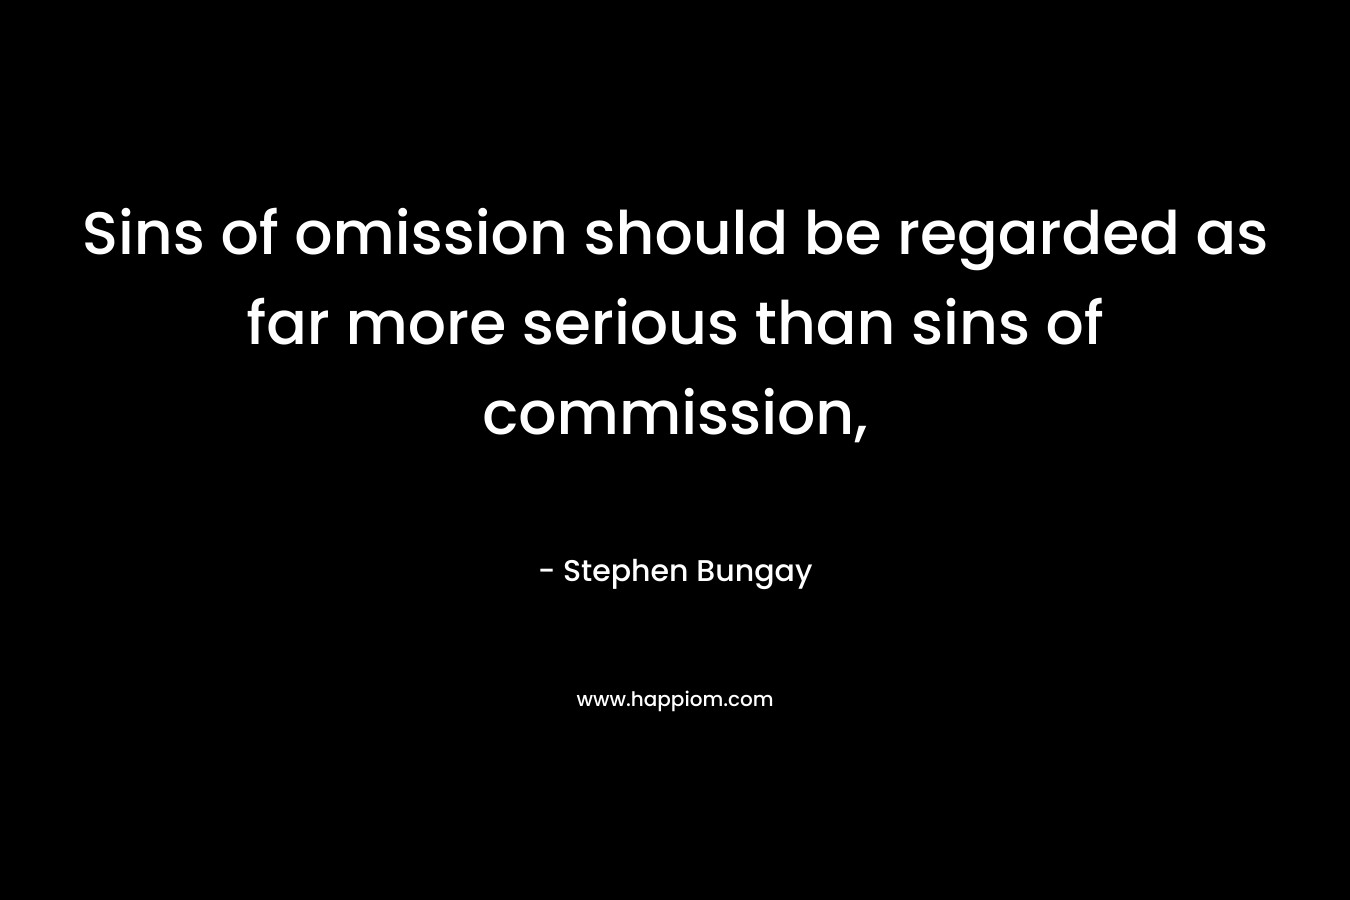 Sins of omission should be regarded as far more serious than sins of commission,